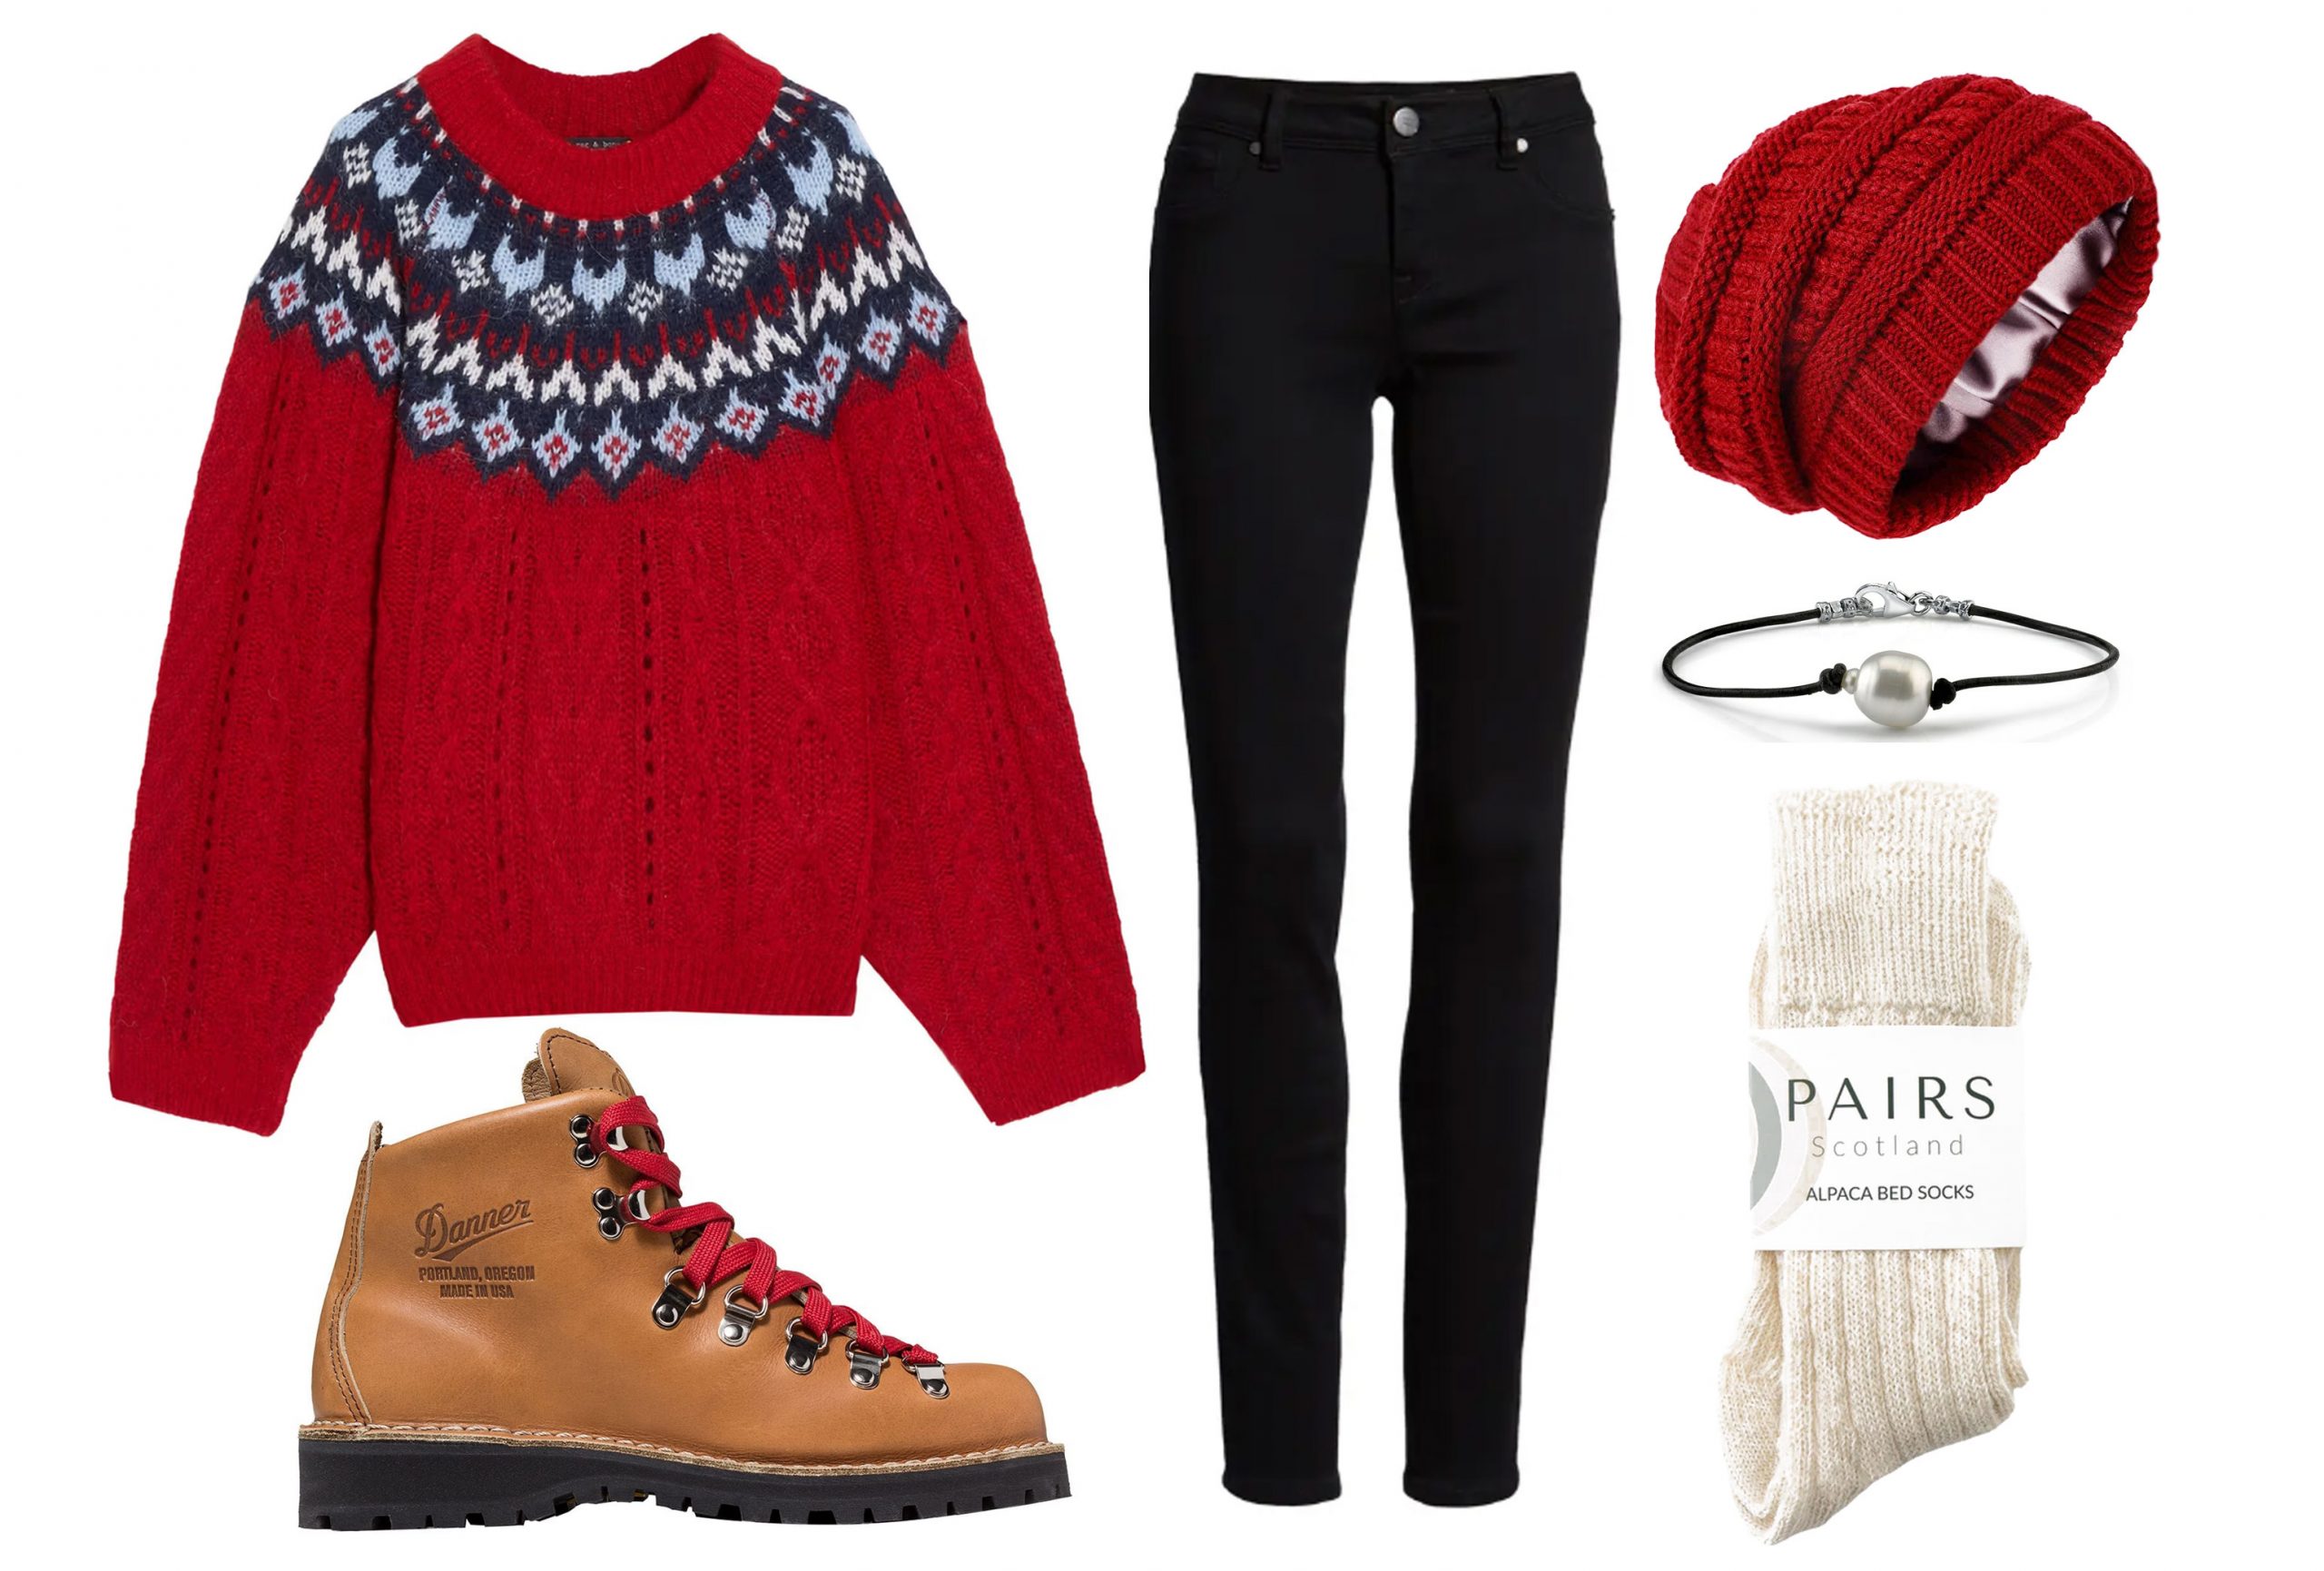 Cabin Chic - Knits and Saturated Reds